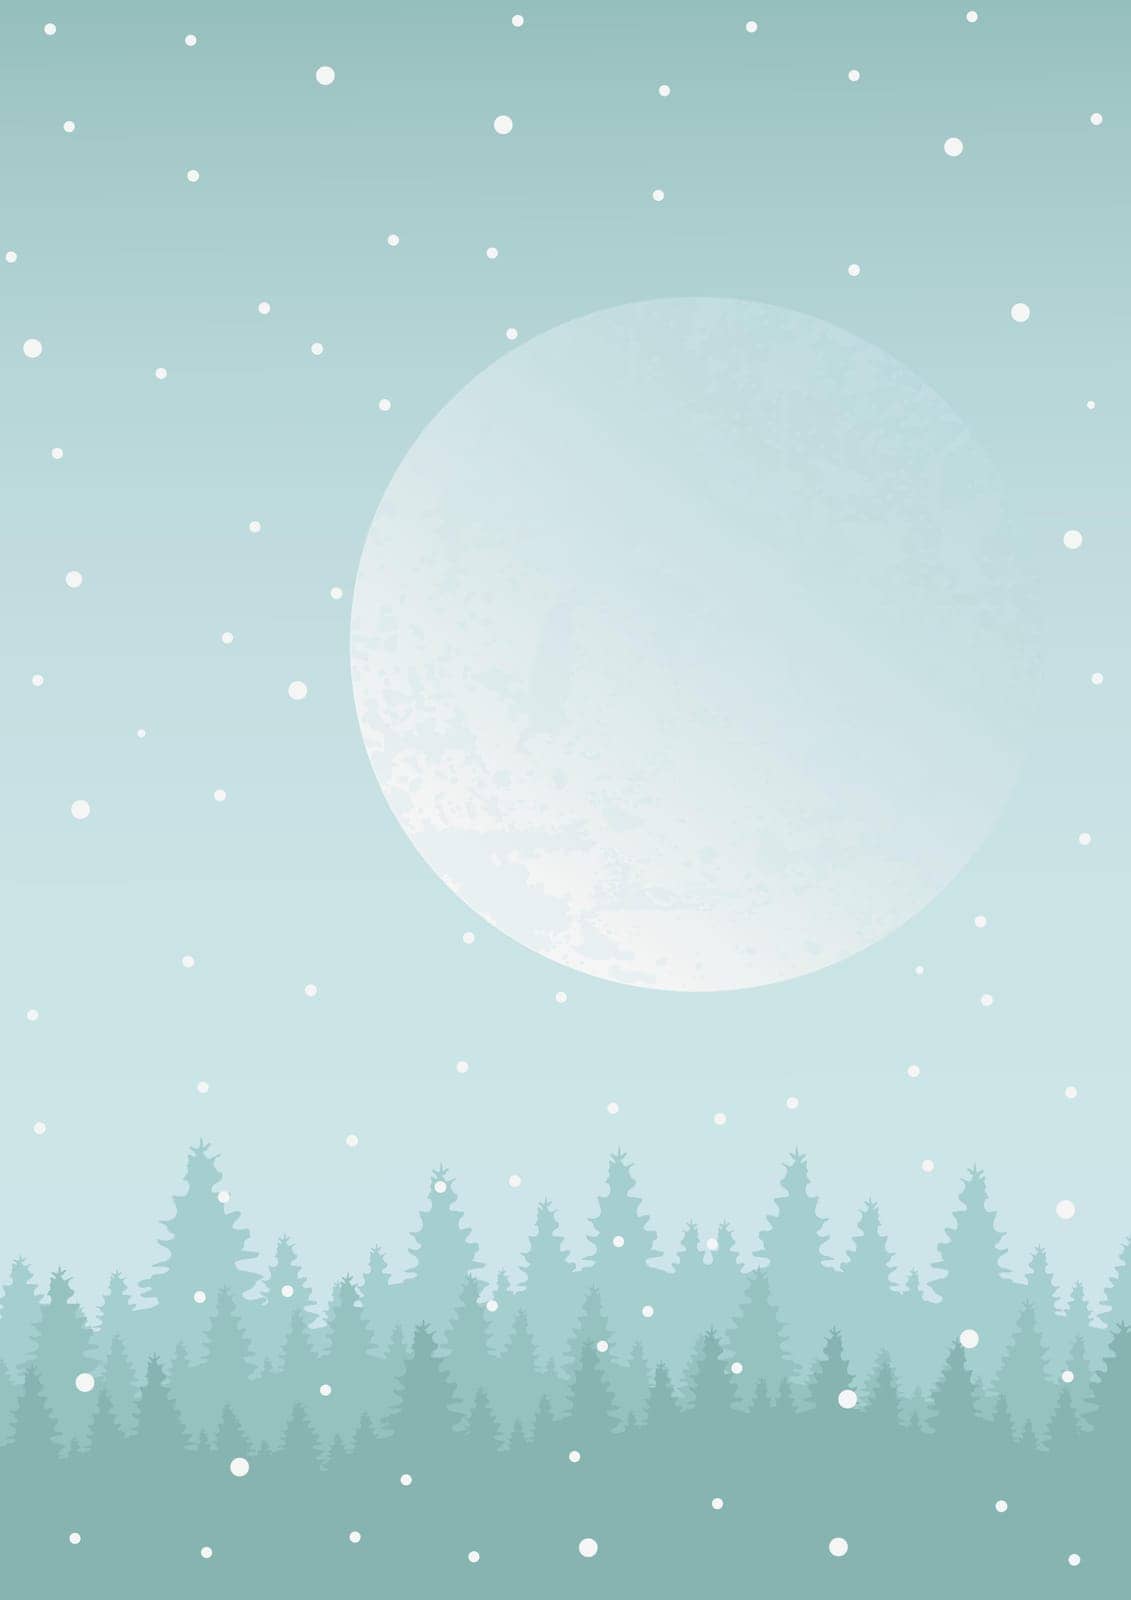 Fantasy moon in winter landscape illustration. Dusk forest and snow drifts. Vector poster